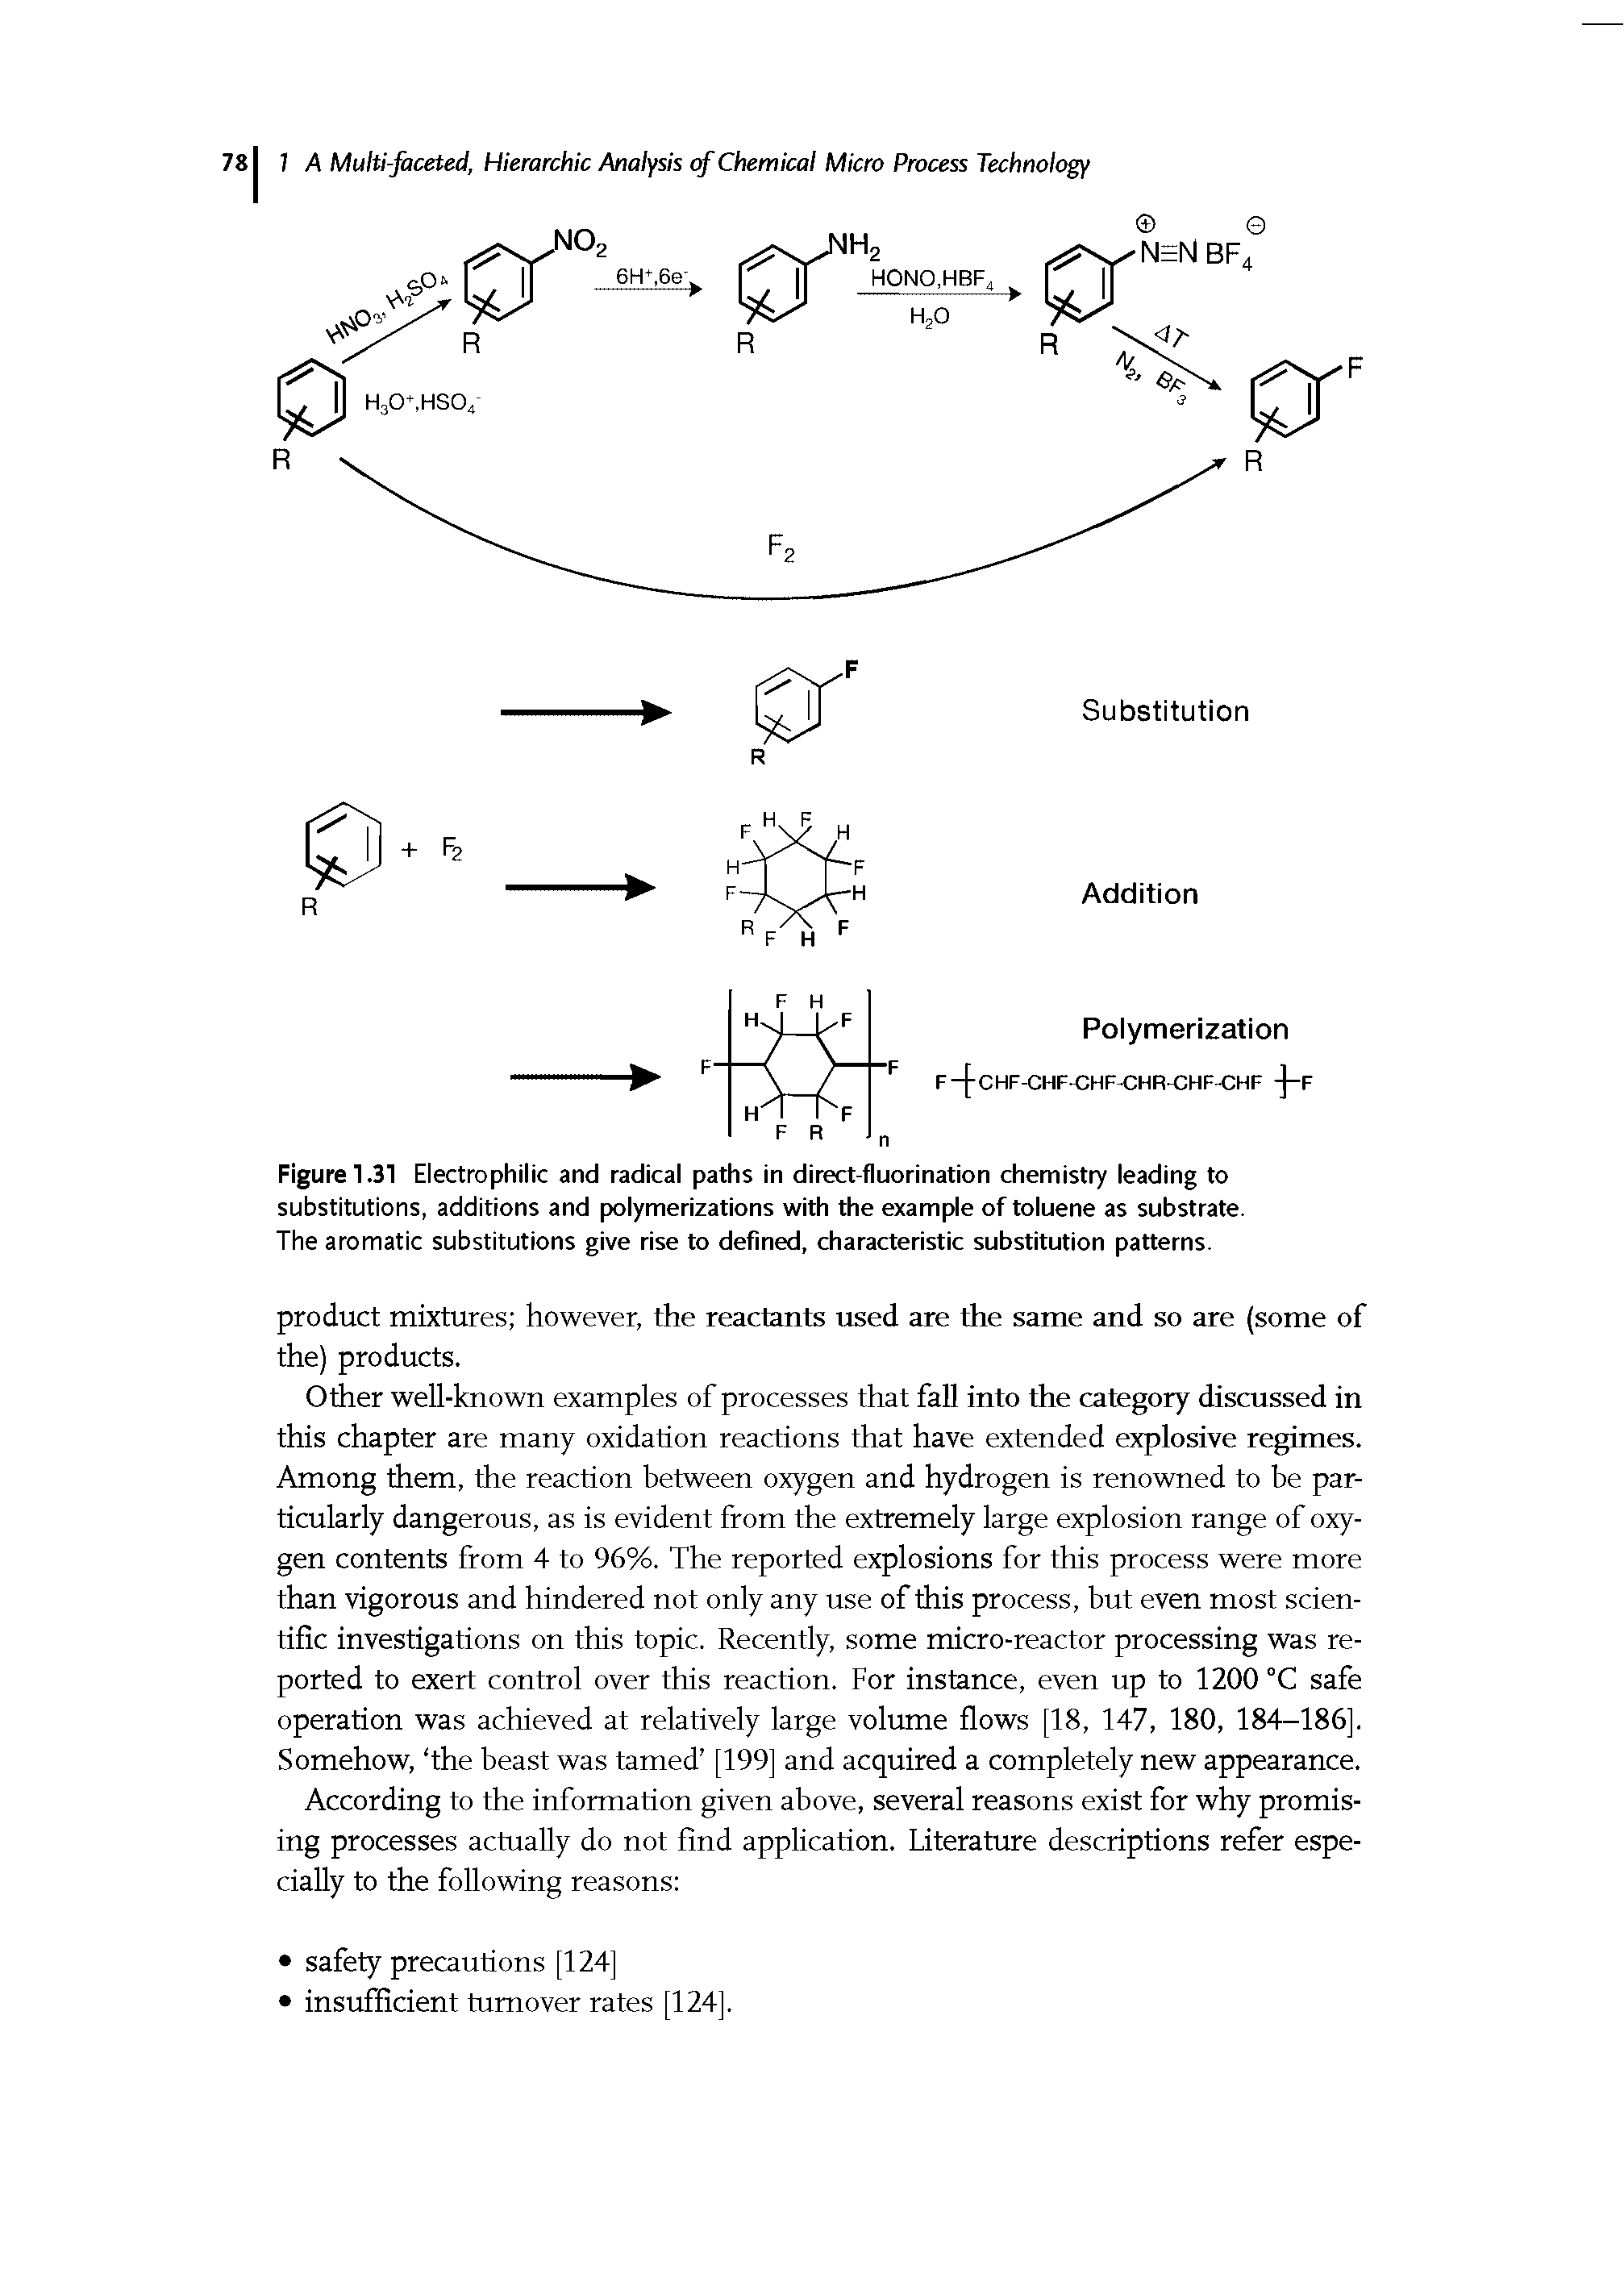 Figure 1.31 Electrophilic and radical paths in direct-fluorination chemistry leading to substitutions, additions and polymerizations with the example of toluene as substrate.